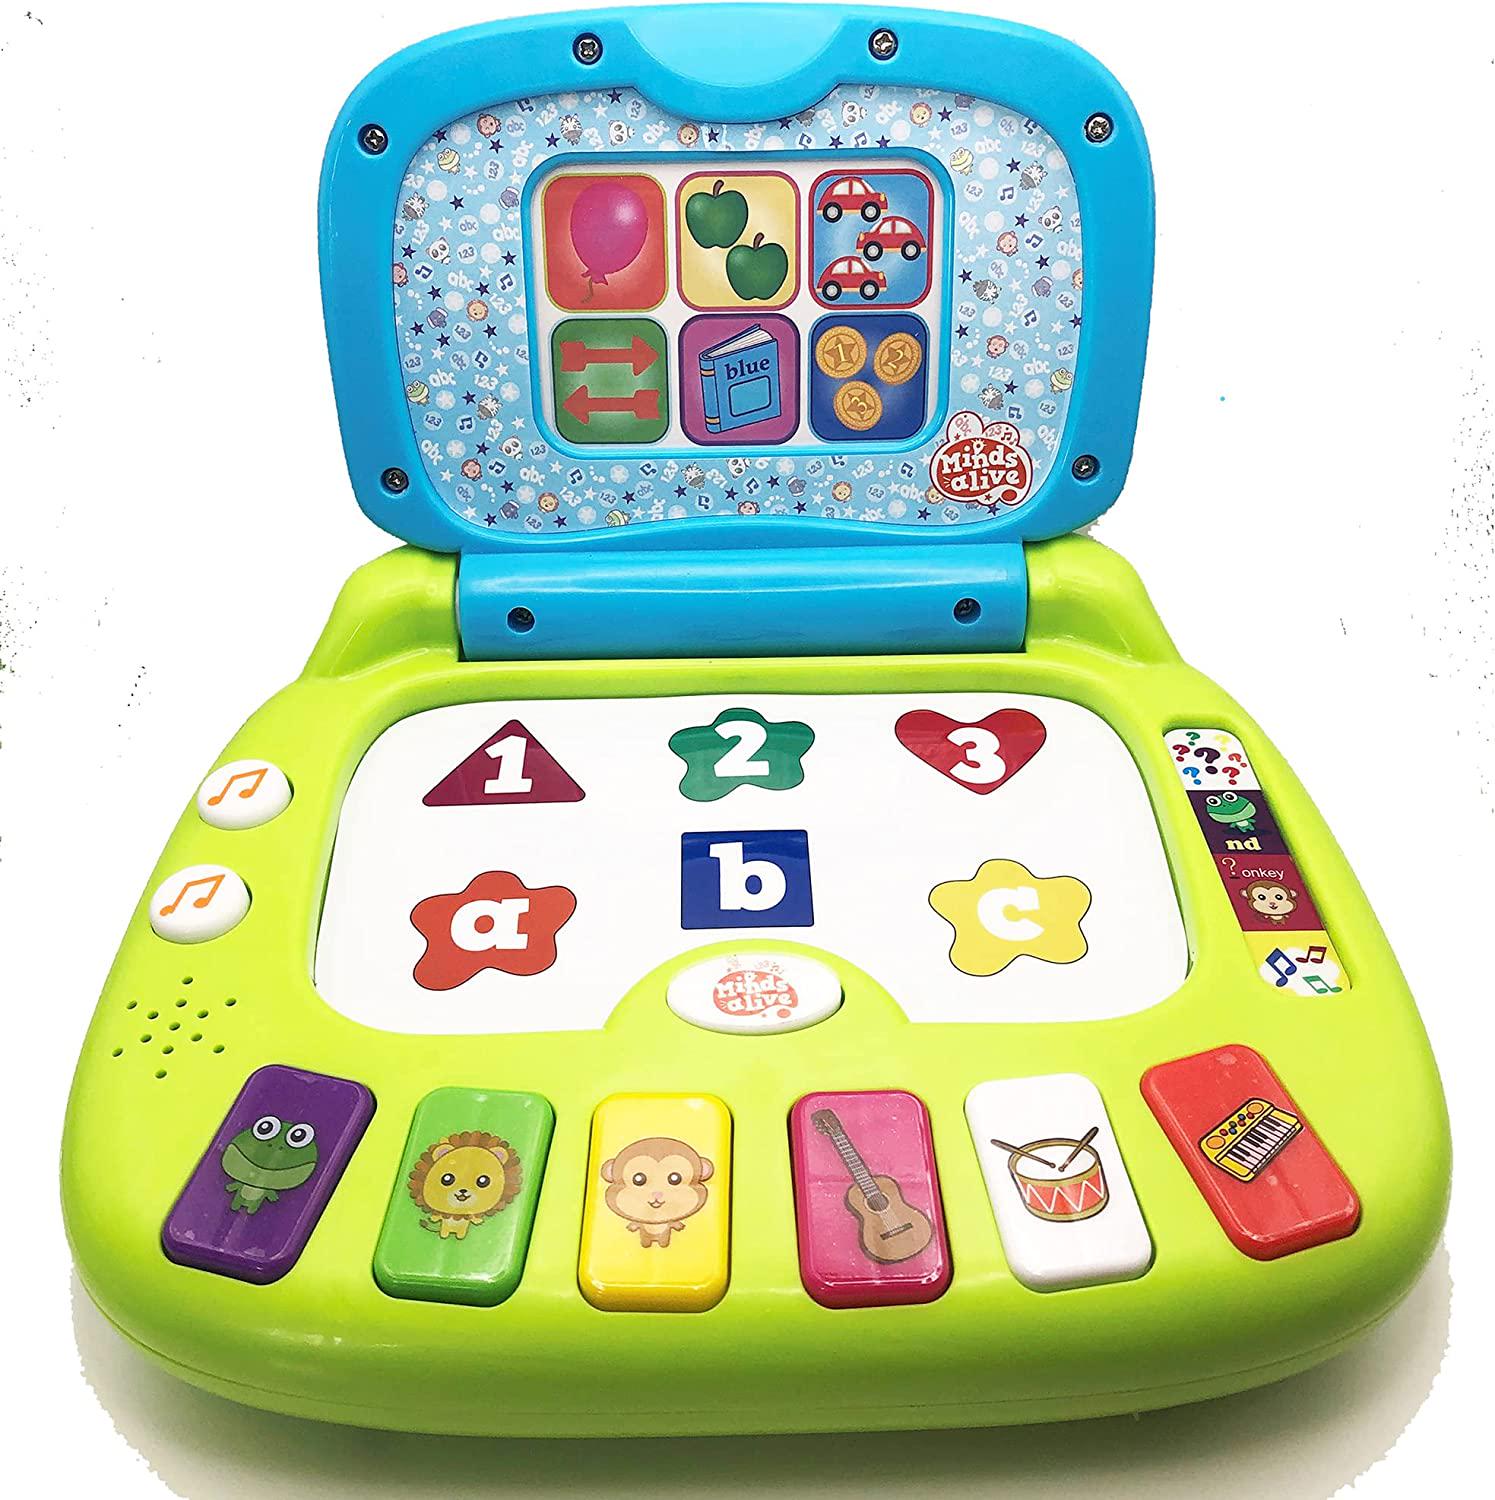 Minds Alive, Minds Alive MA03 Smart Tablet Toy for Kids-Helps Child Development, Listening and Attention Skills-Features Fun Interactive Learning Activities, 2+ Years